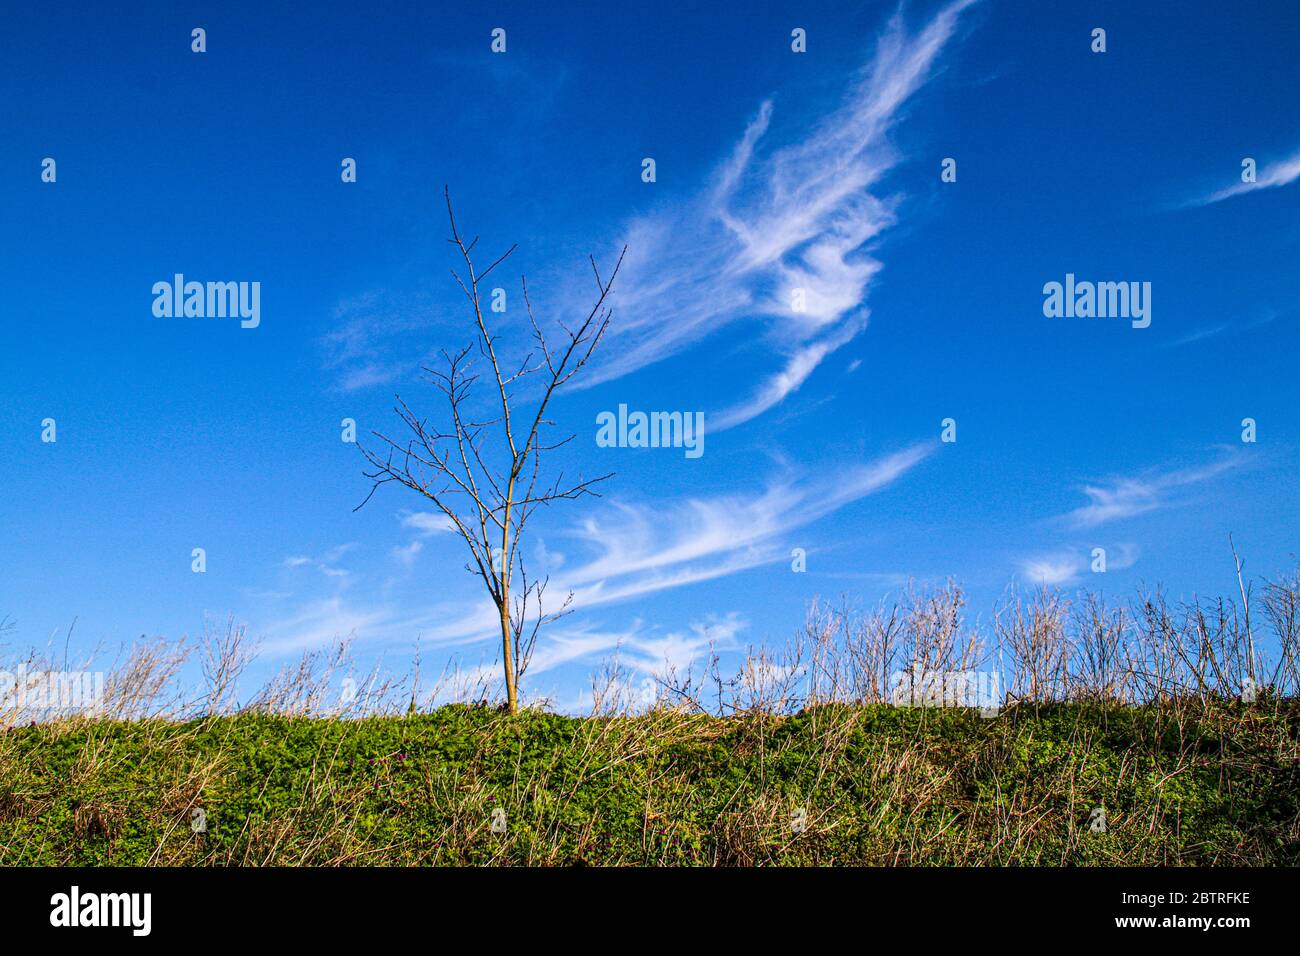 Colorful landscape with a single tree and blue sky with white clouds Stock Photo